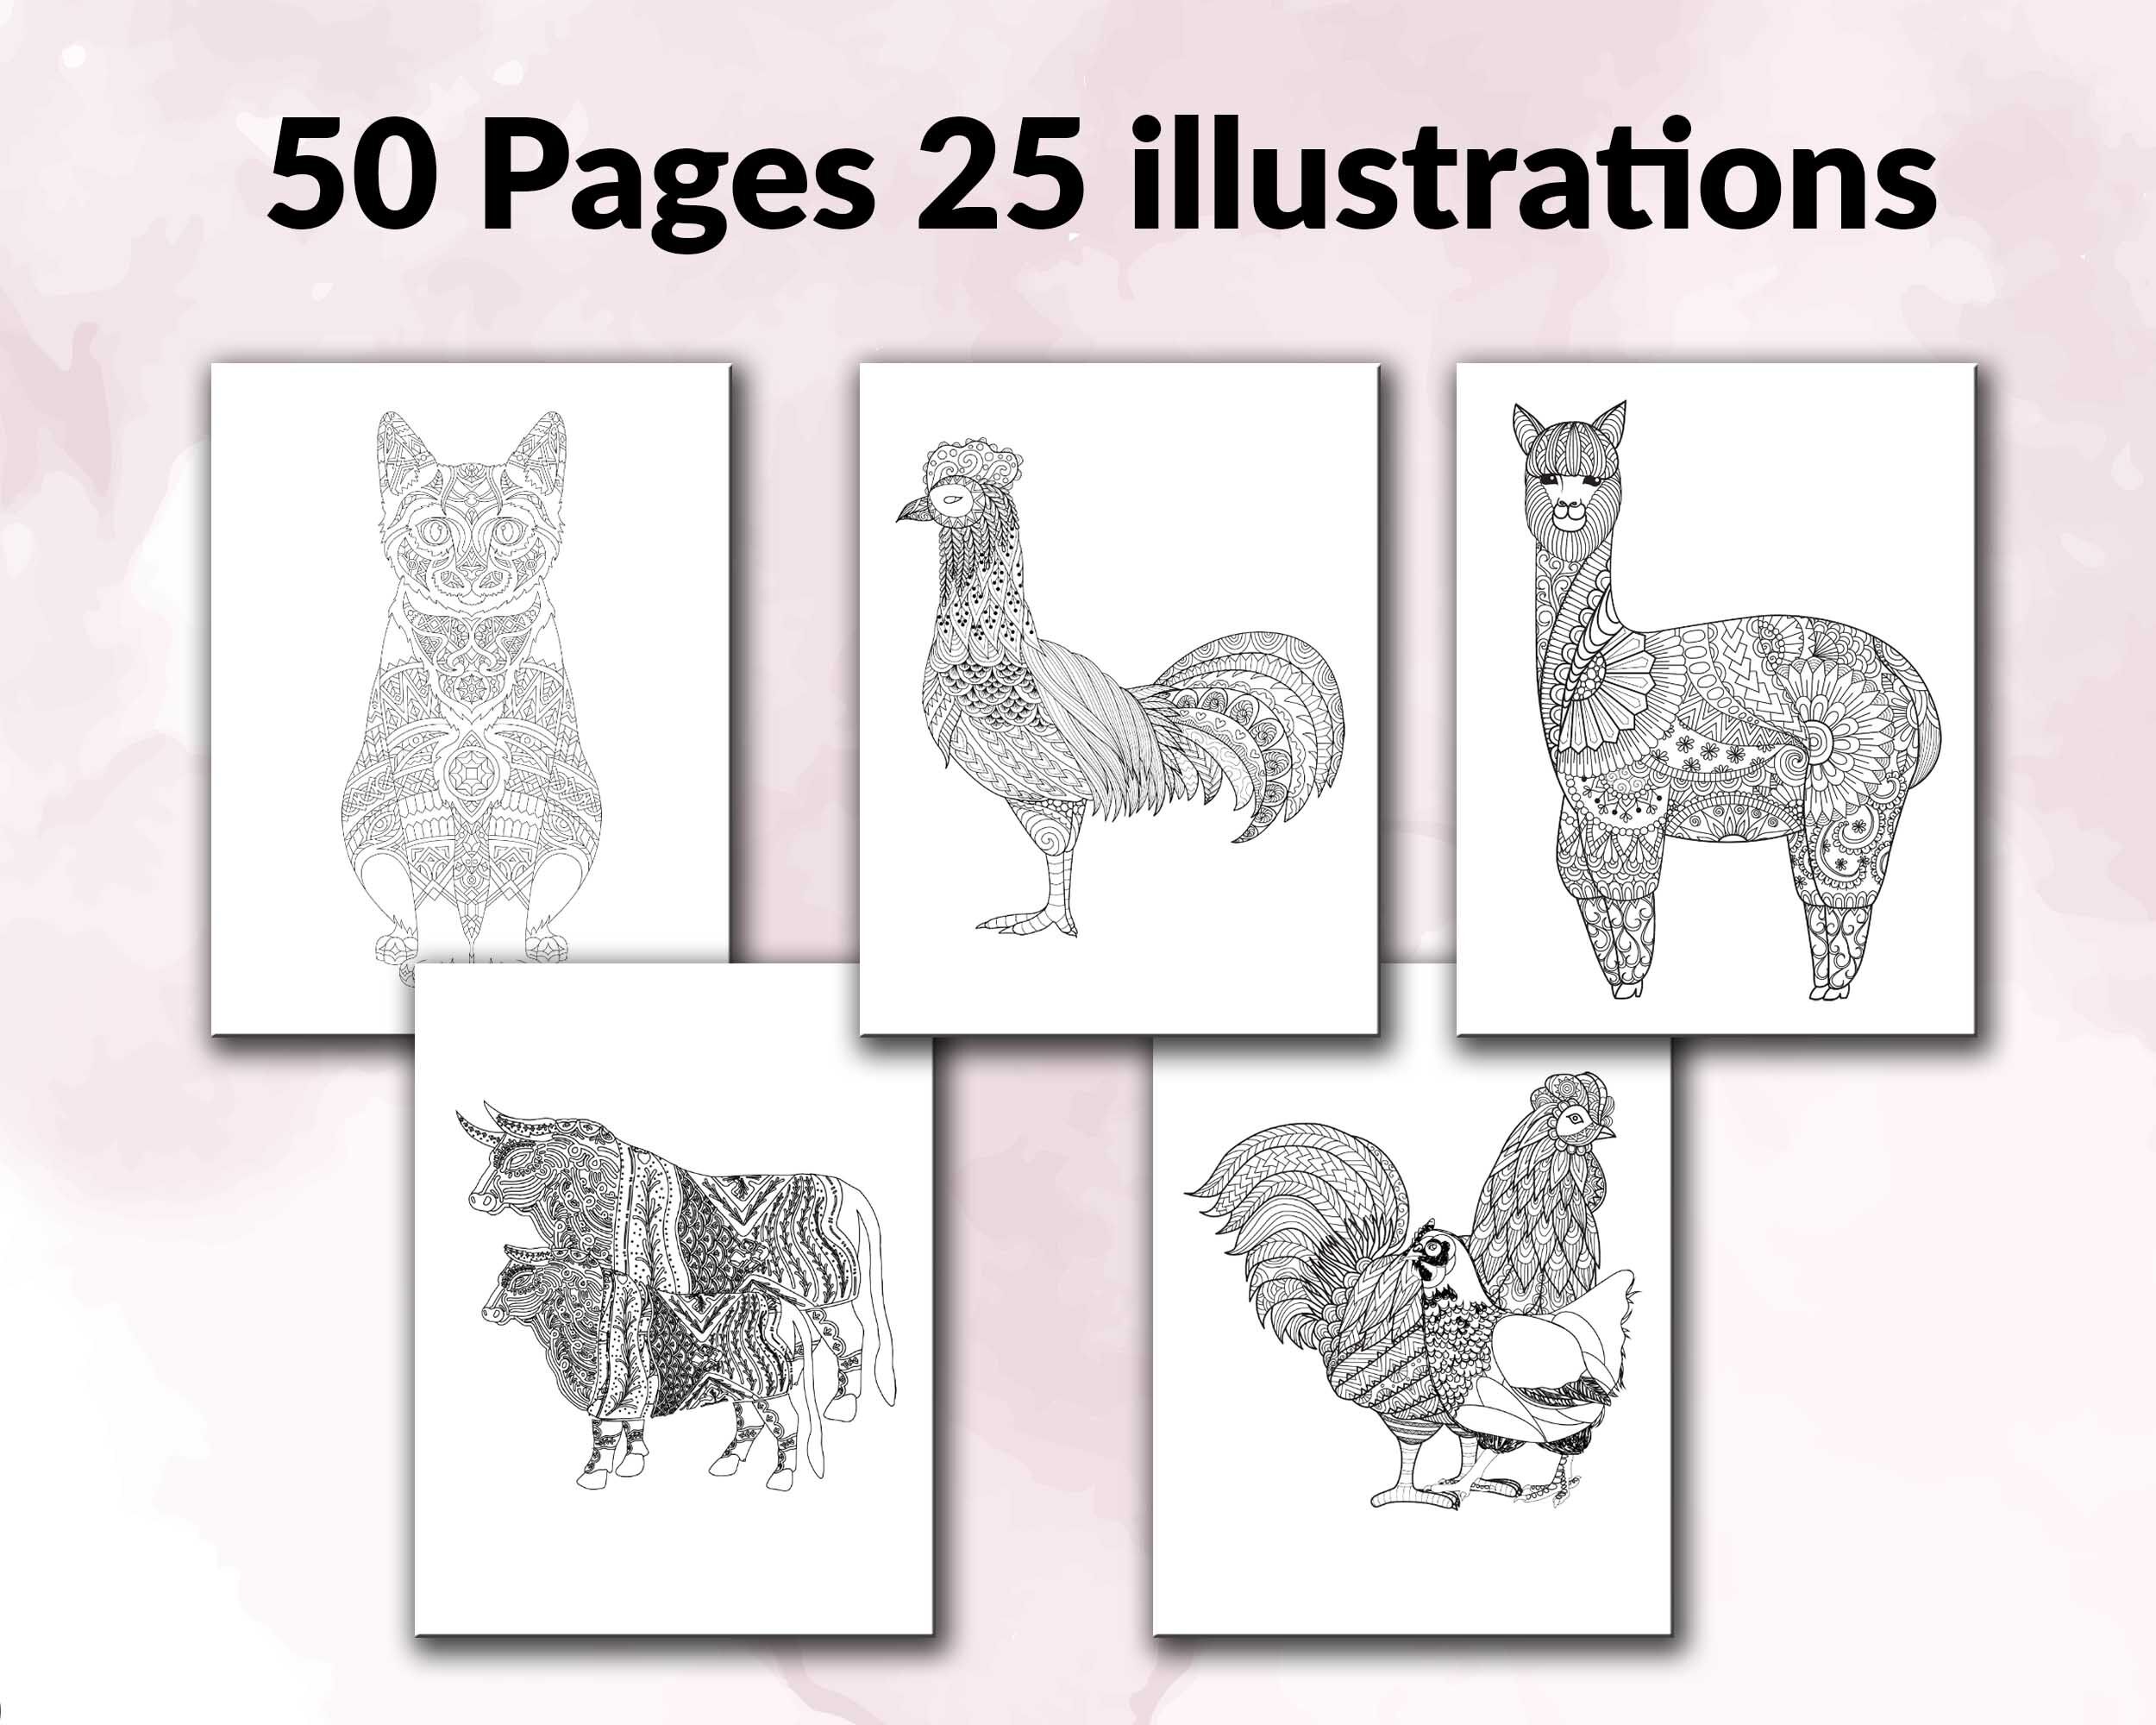 KDP Interior Template: Coloring Book for Adults Ready to Use Low Content Book JPEG Files +PDF File 100 High-Quality Animal Illustrations